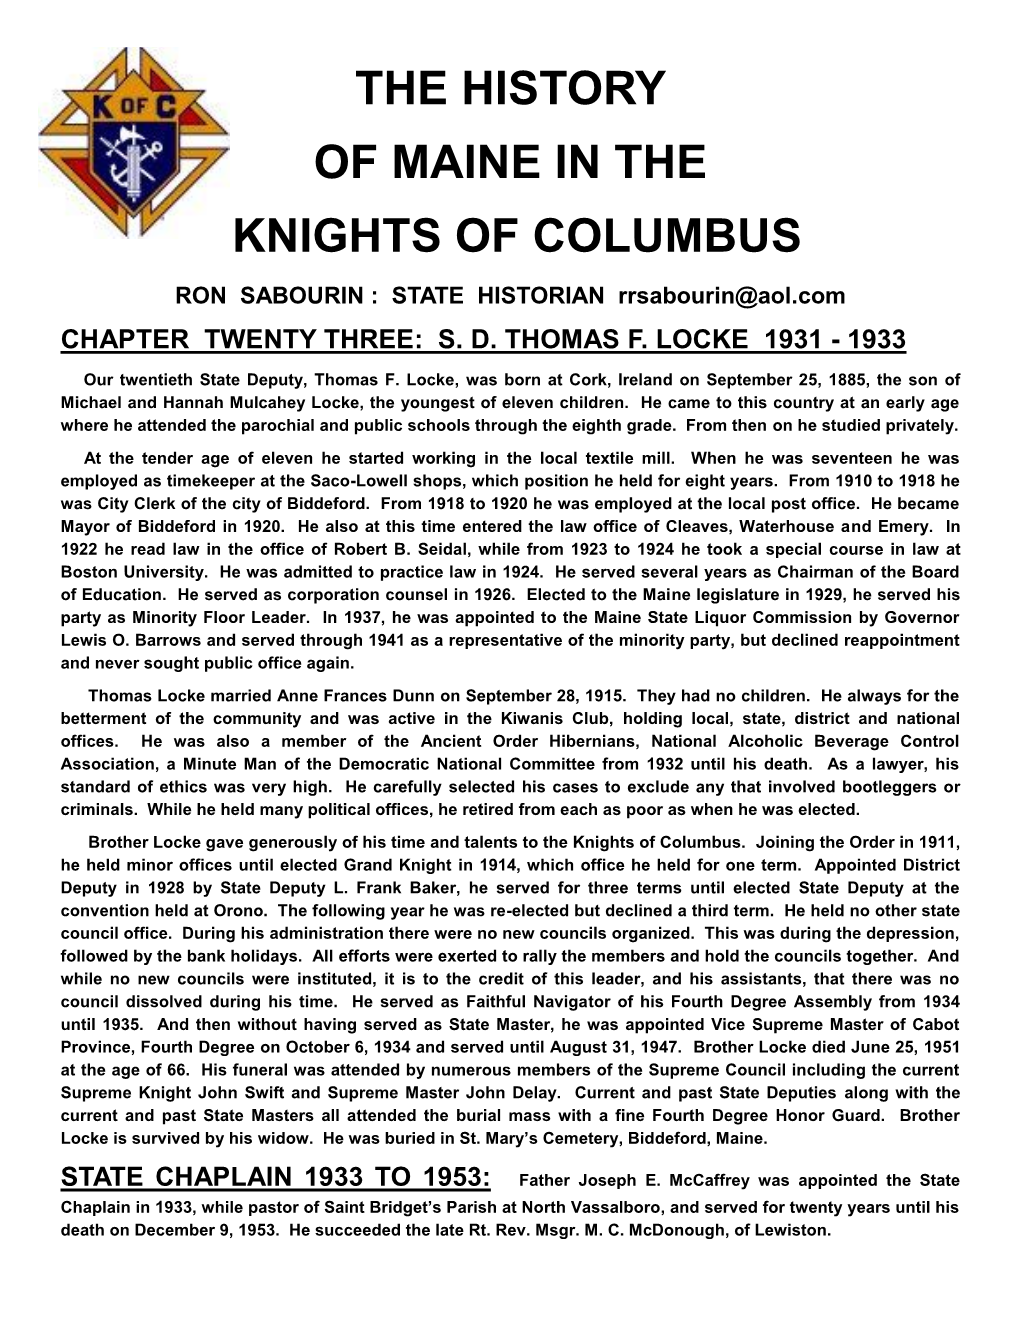 The History of Maine in the Knights of Columbus